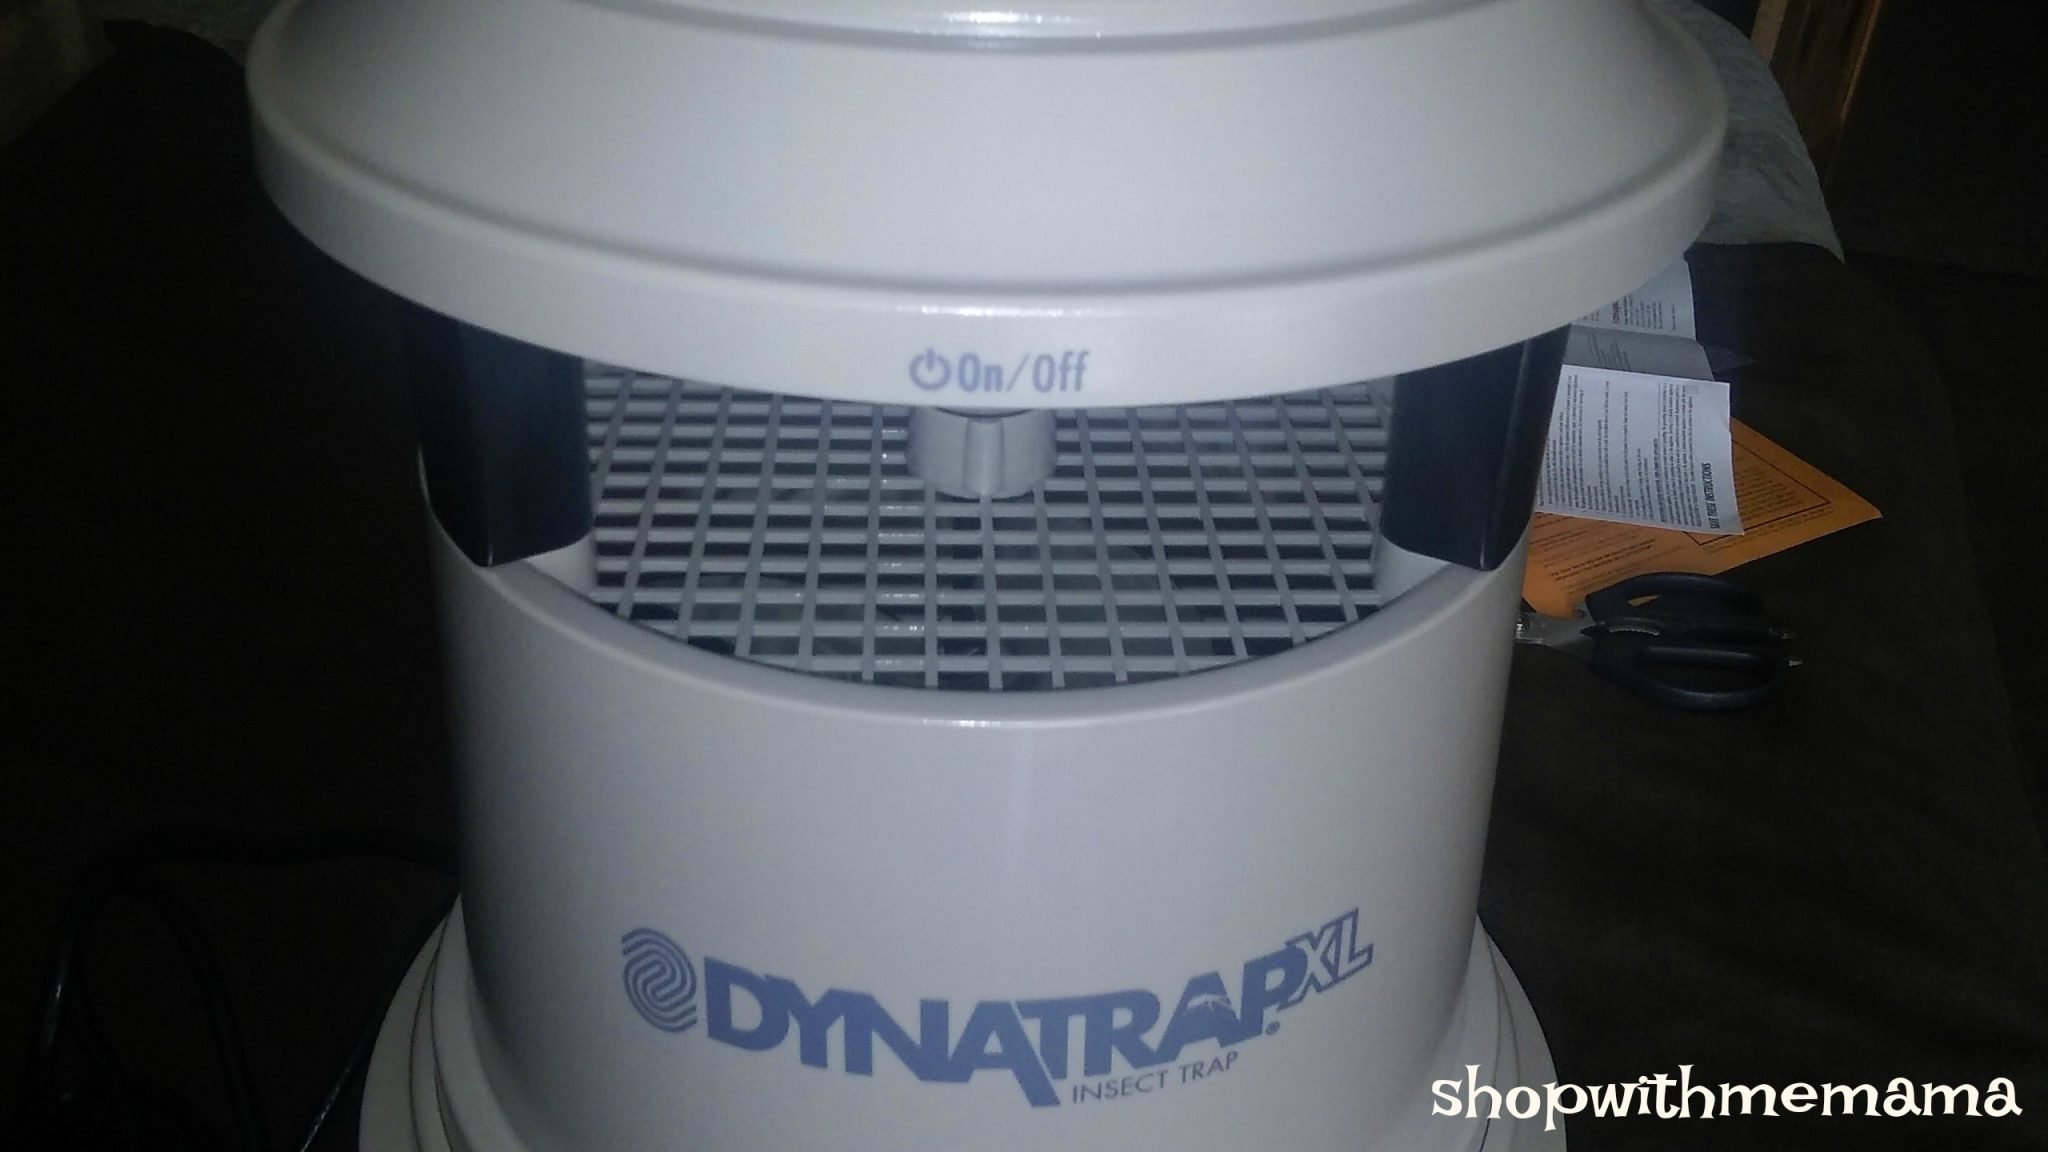 Enjoy a Bug-Free Outdoors with The DynaTrap Insect Trap